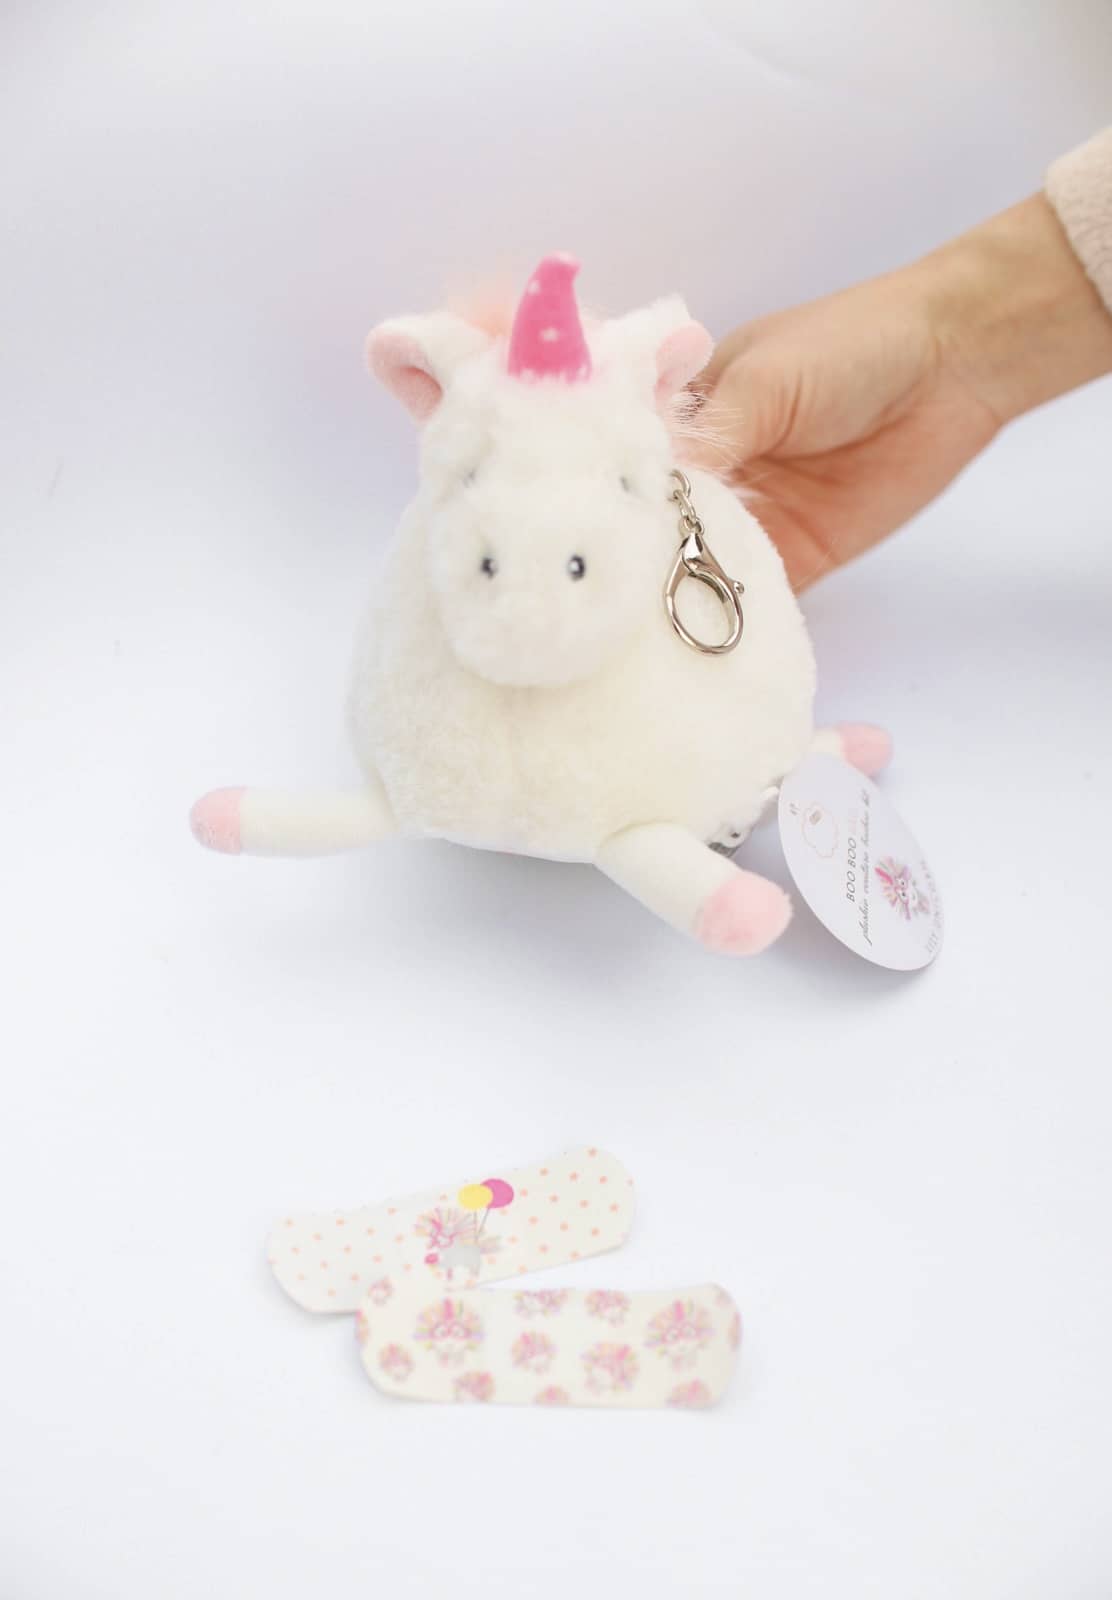 Unicorn Plush: Lily, World's only Toy First-Aid Kit